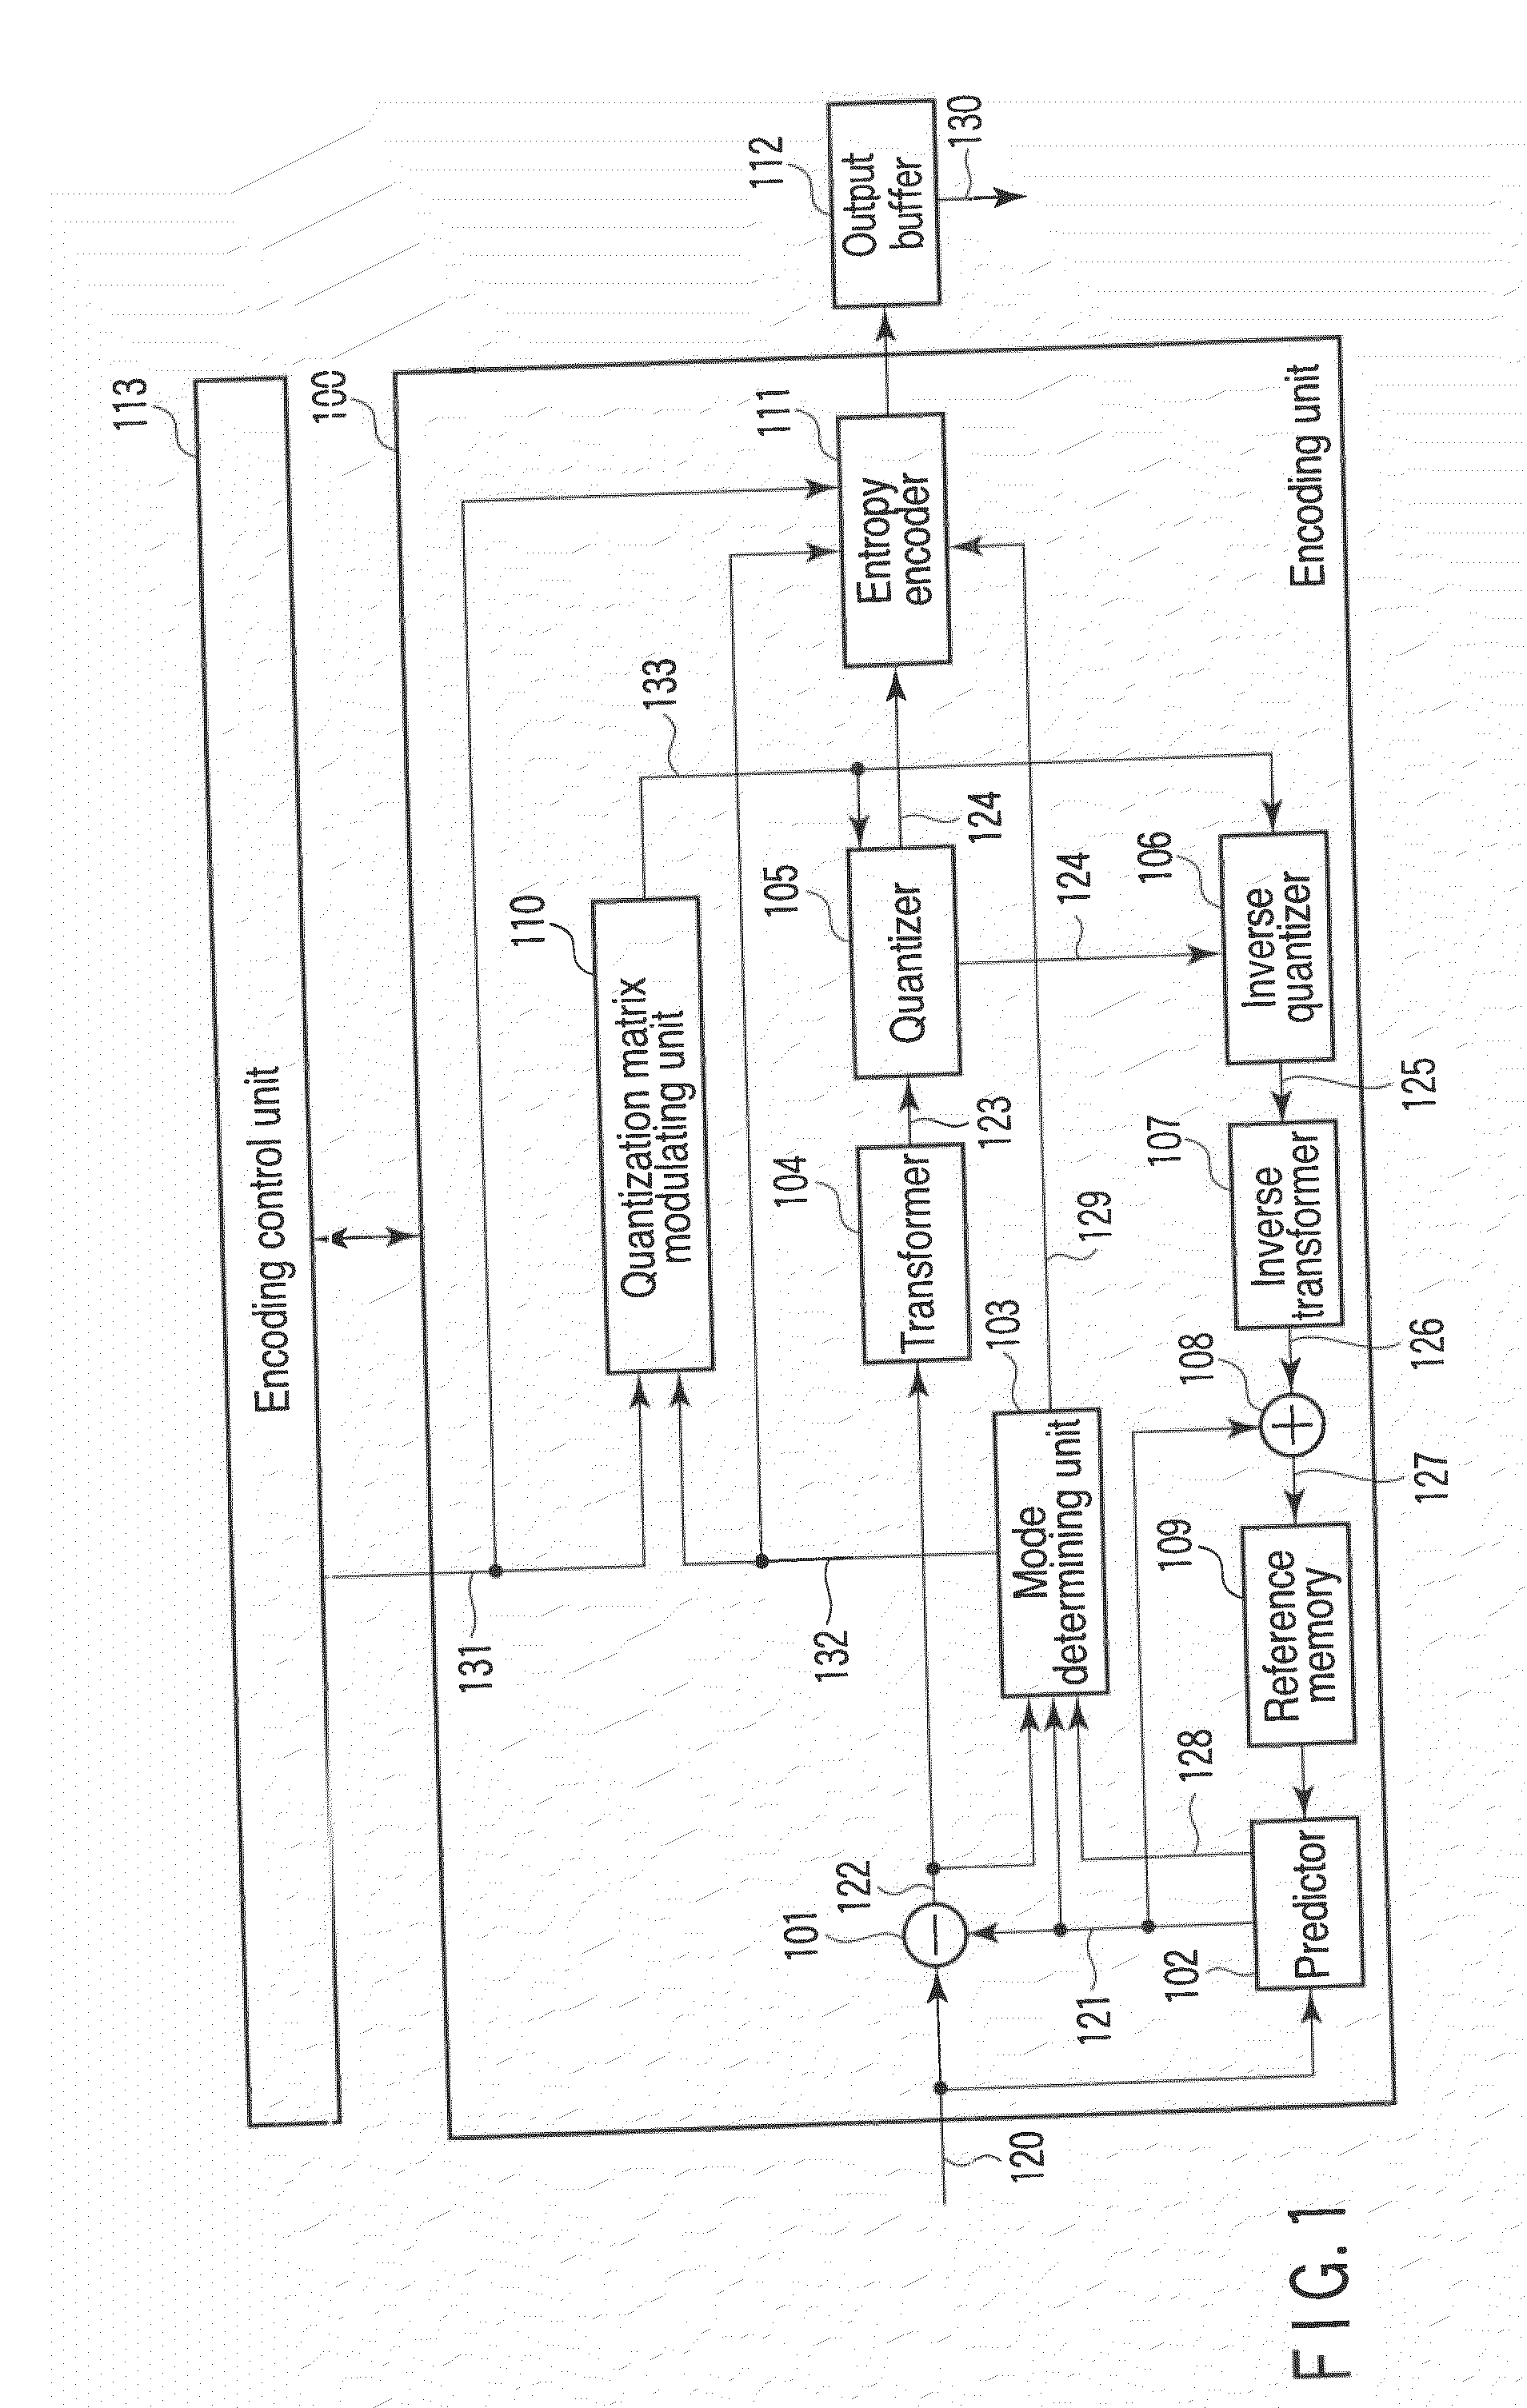 Video encoding and decoding method and apparatus